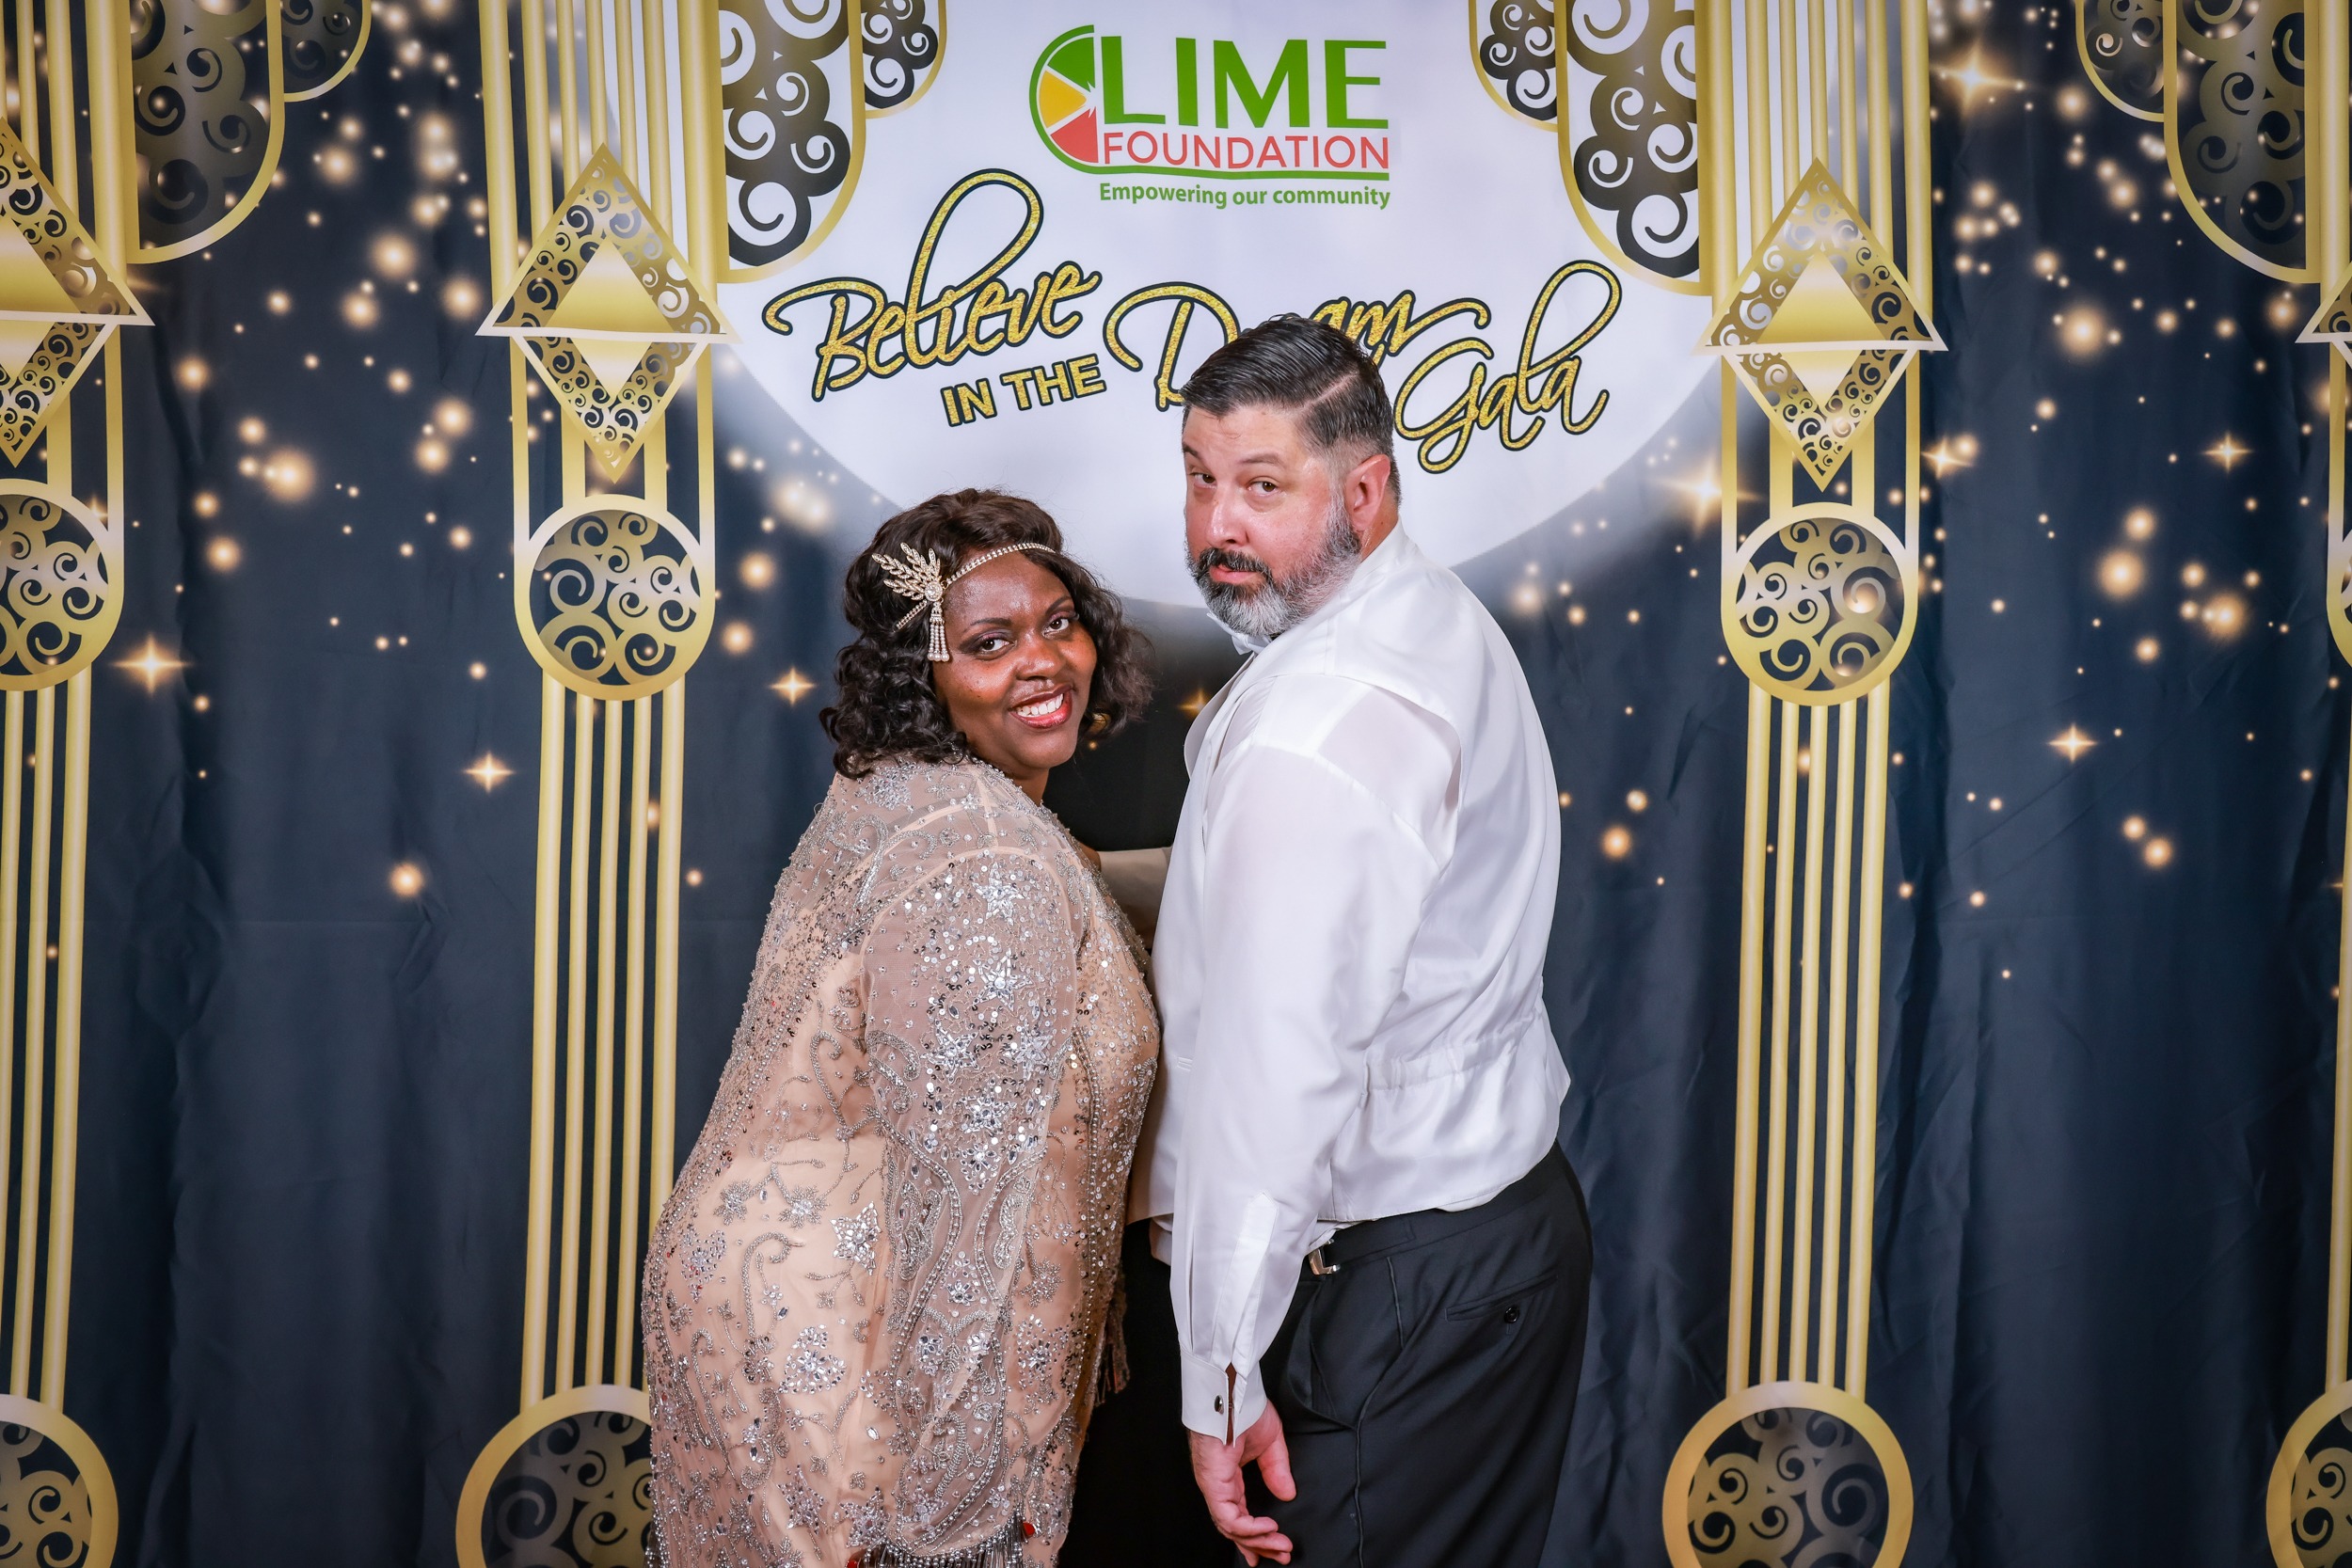 A man and woman posing in front of a photo booth sponsored by The LIME Foundation of Santa Rosa.